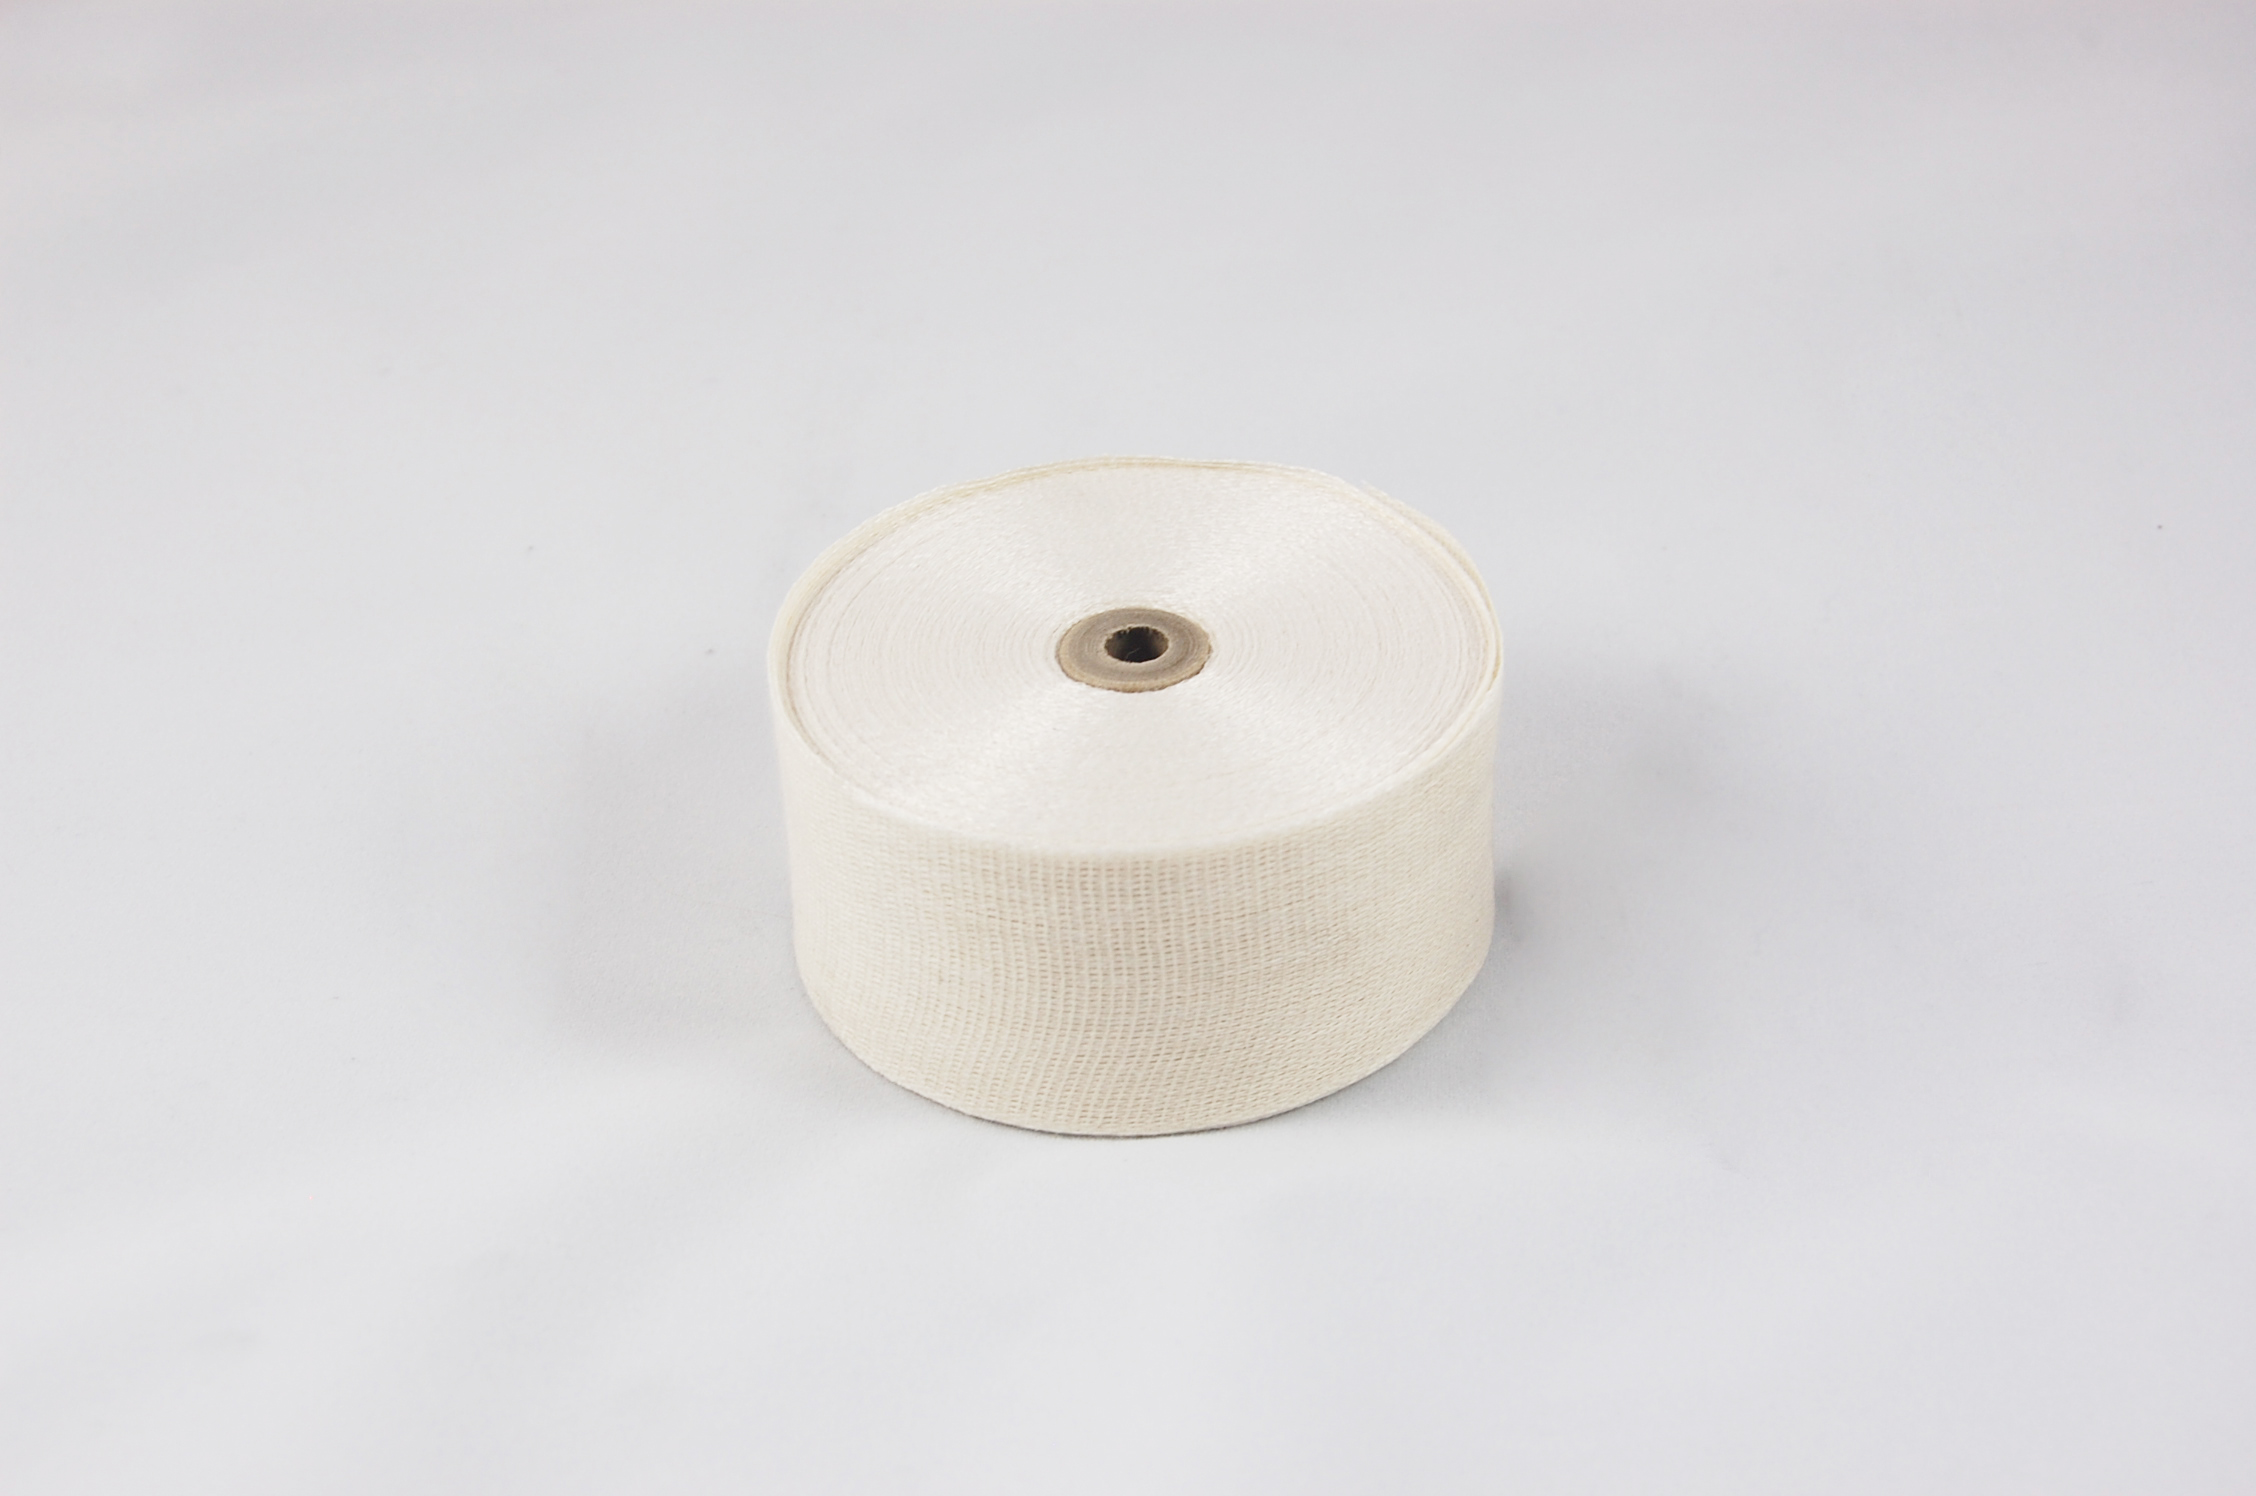 1-1/2" 92412 .020" Woven Cotton Binding Tape 105°C, natural, 1-1/2" wide x  36 YD roll